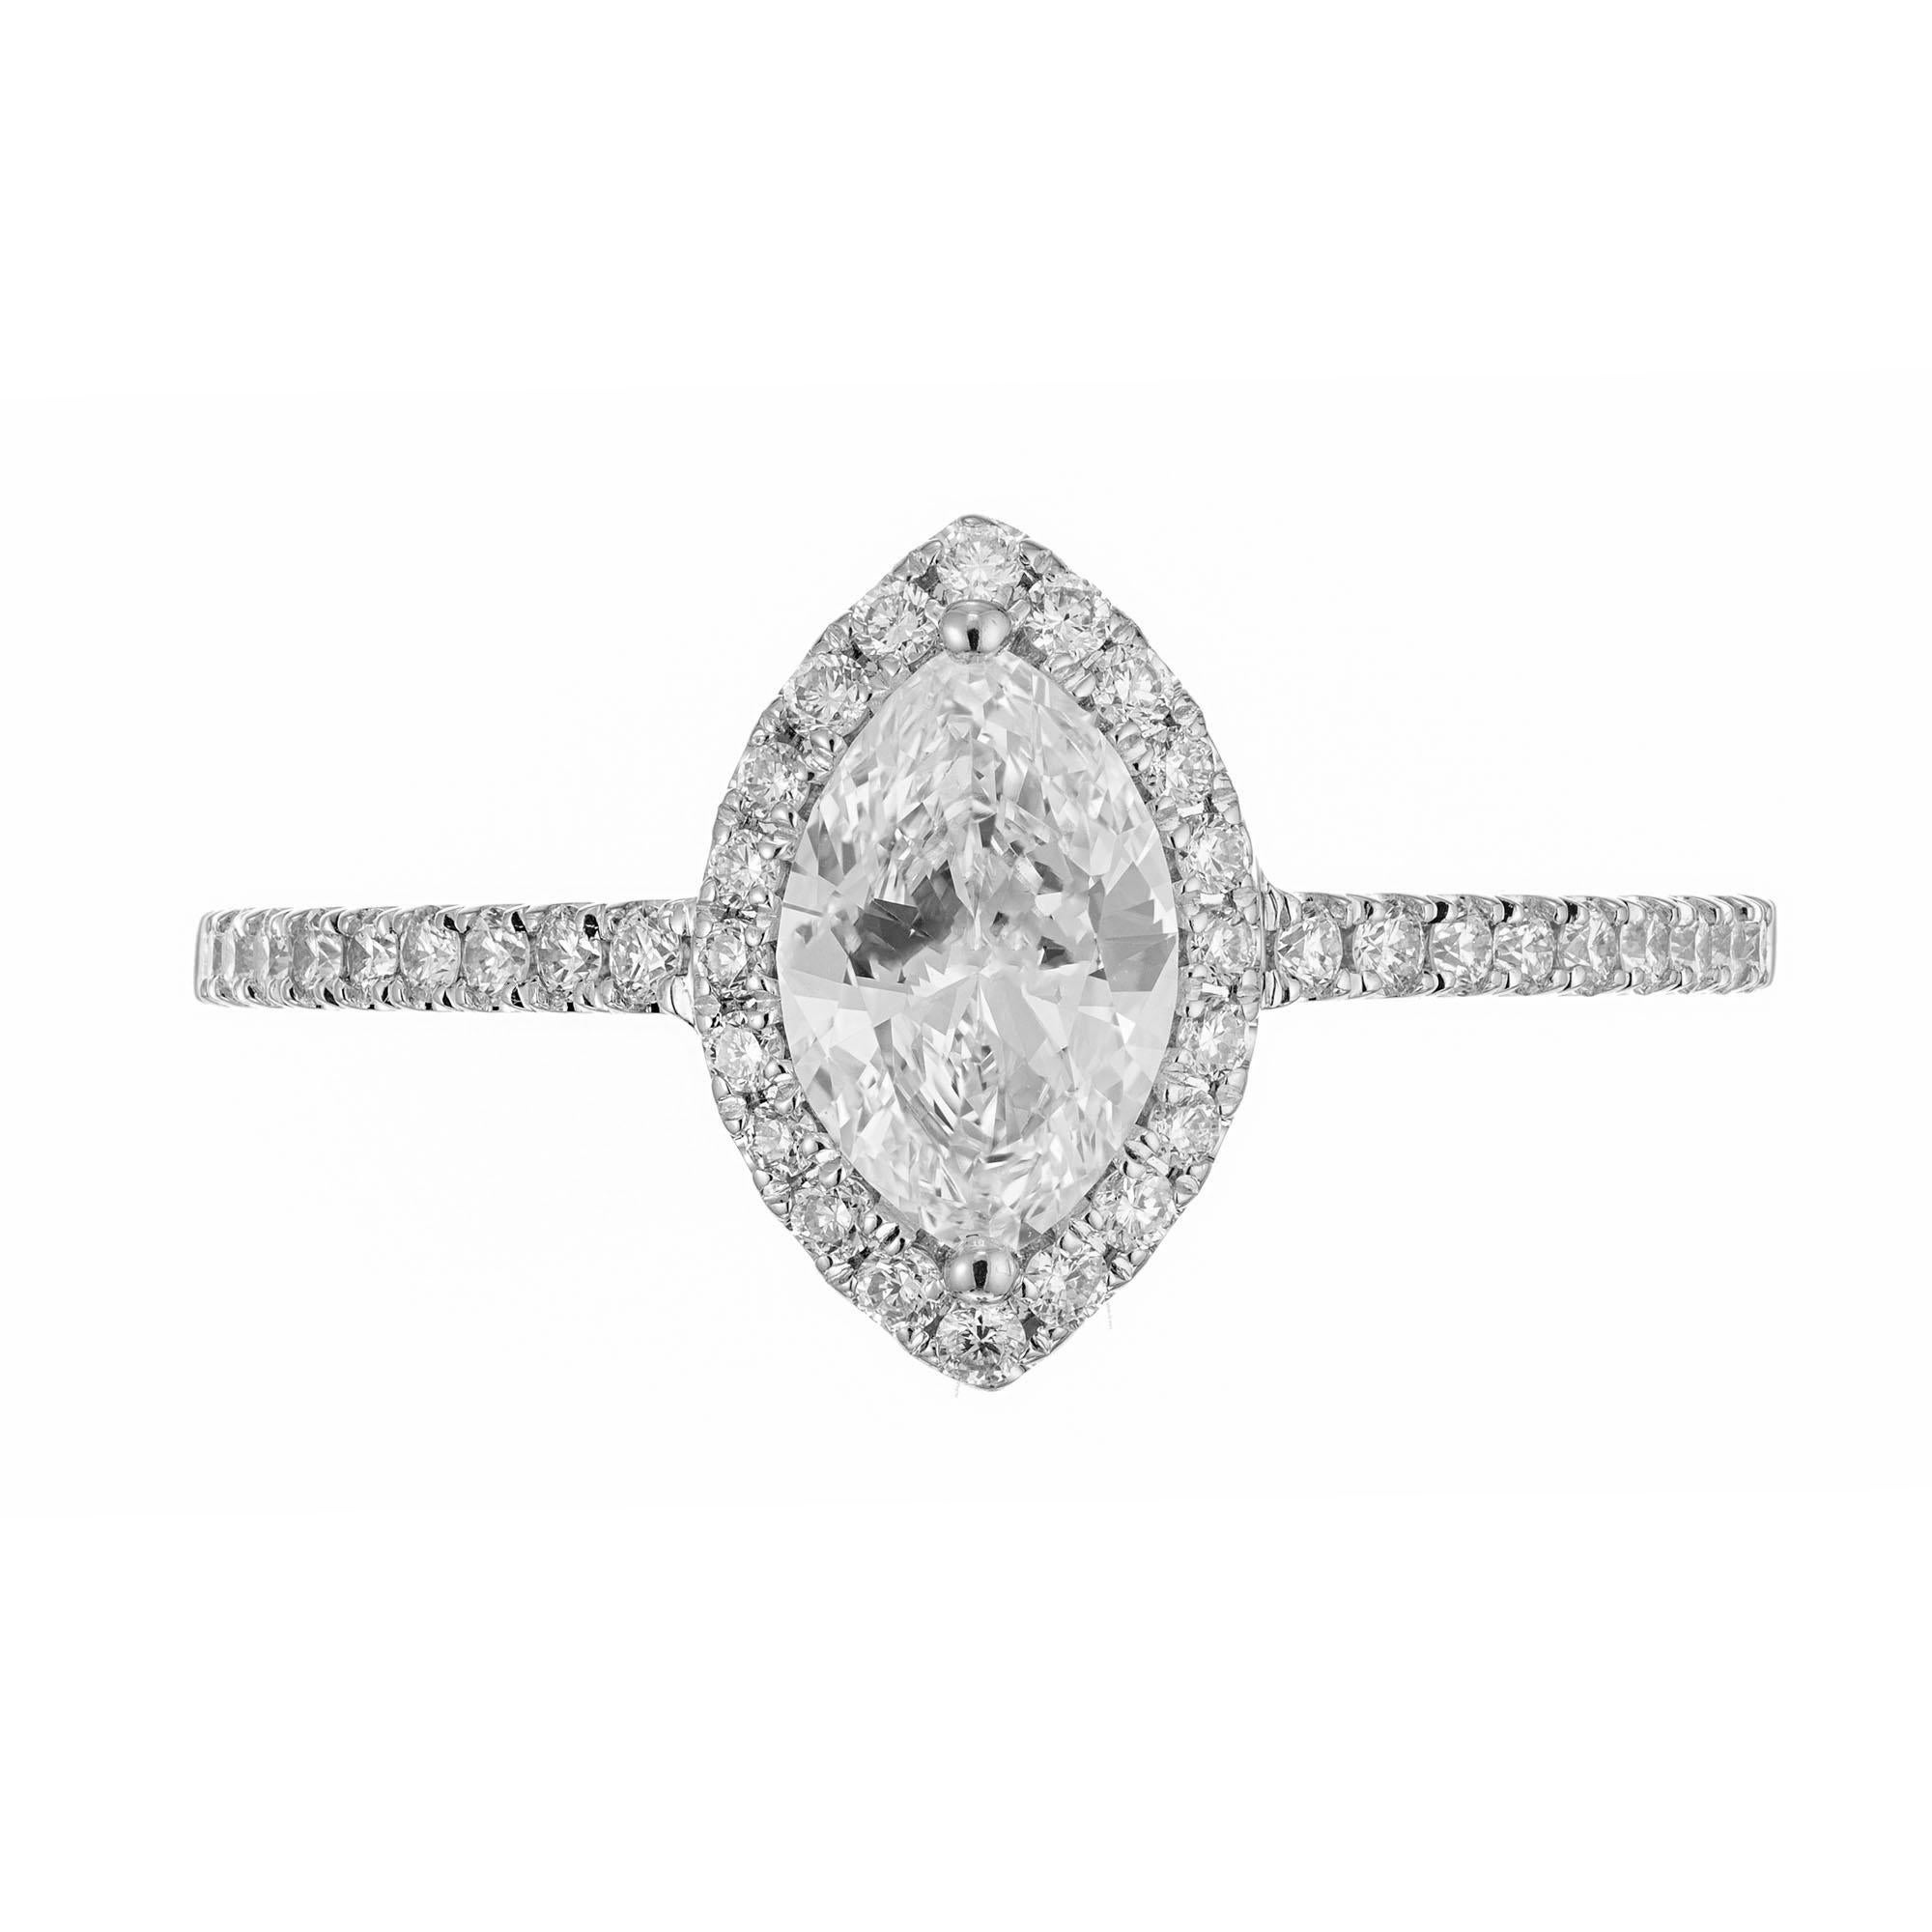 Sylvie Marquise diamond engagement ring. EGL certified marquise center diamond, set in a 14k white gold setting with a halo of full cut diamonds with accent diamonds along each side of the shank. Designed so that a wedding band can sit flush against